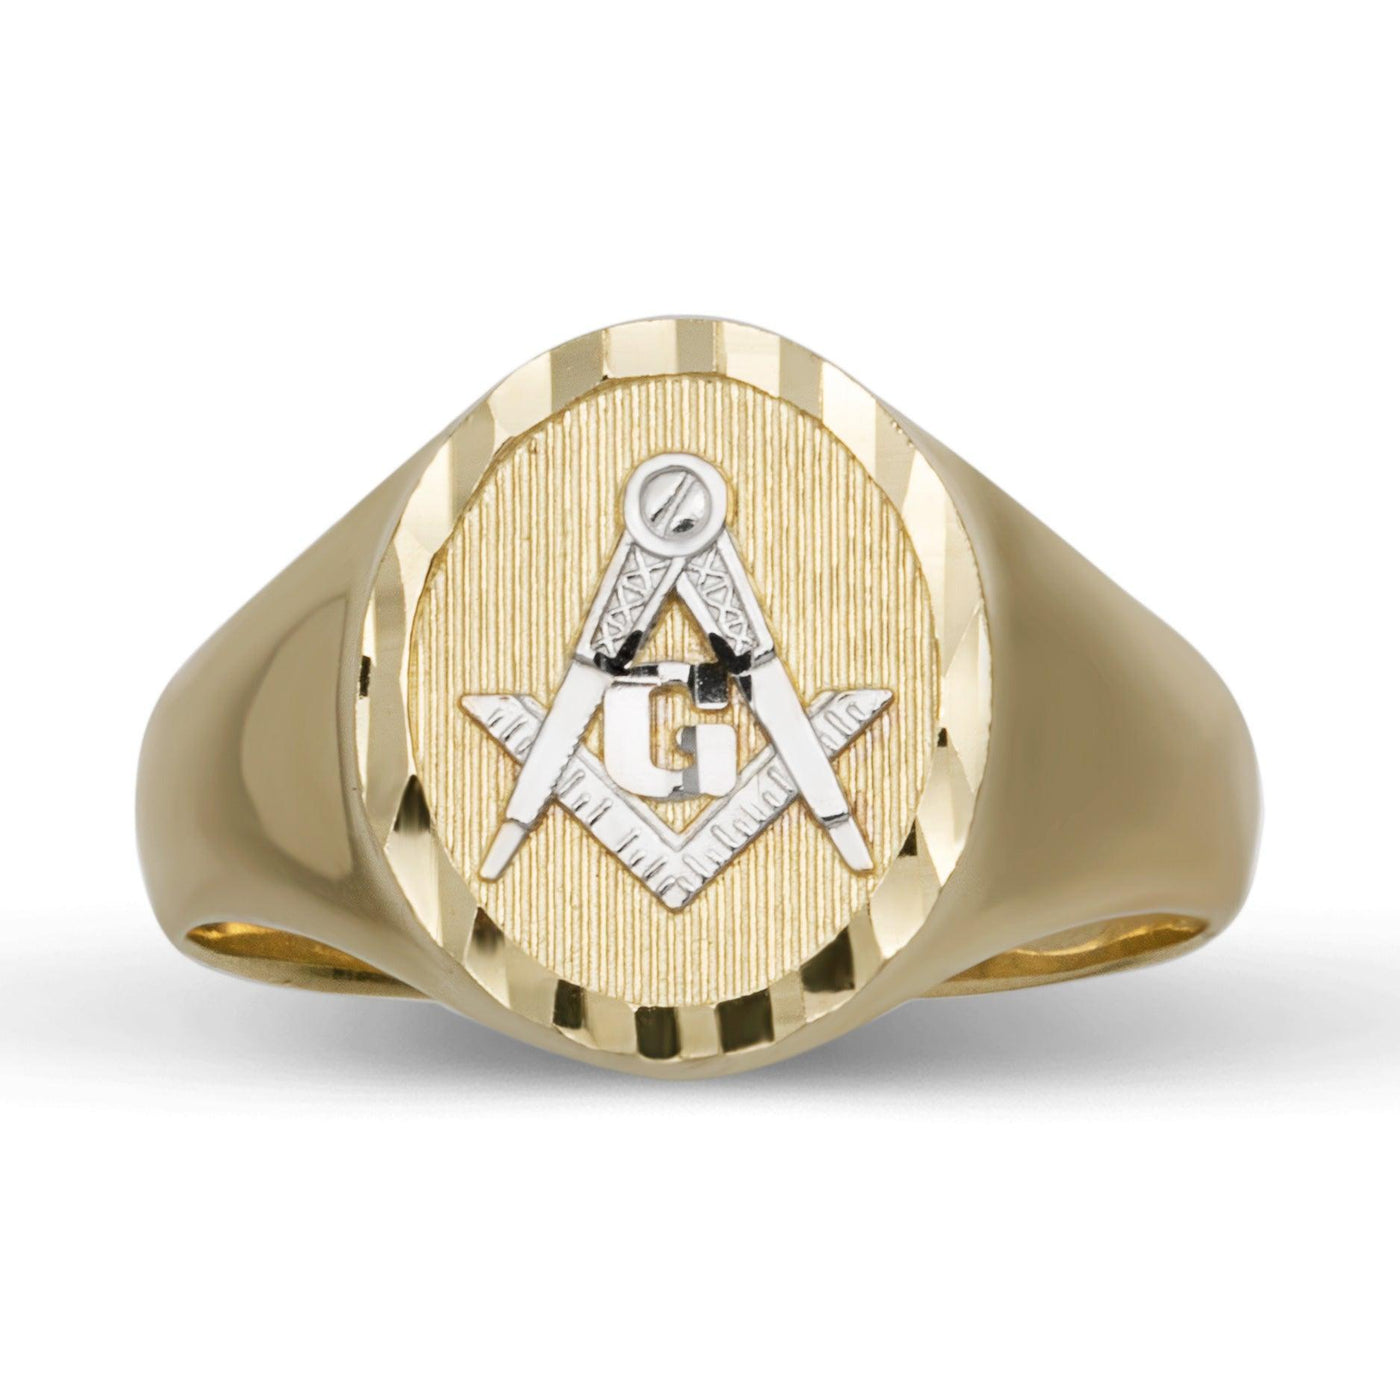 The Square and Compass Signet Ring Solid 10K Yellow Gold - bayamjewelry